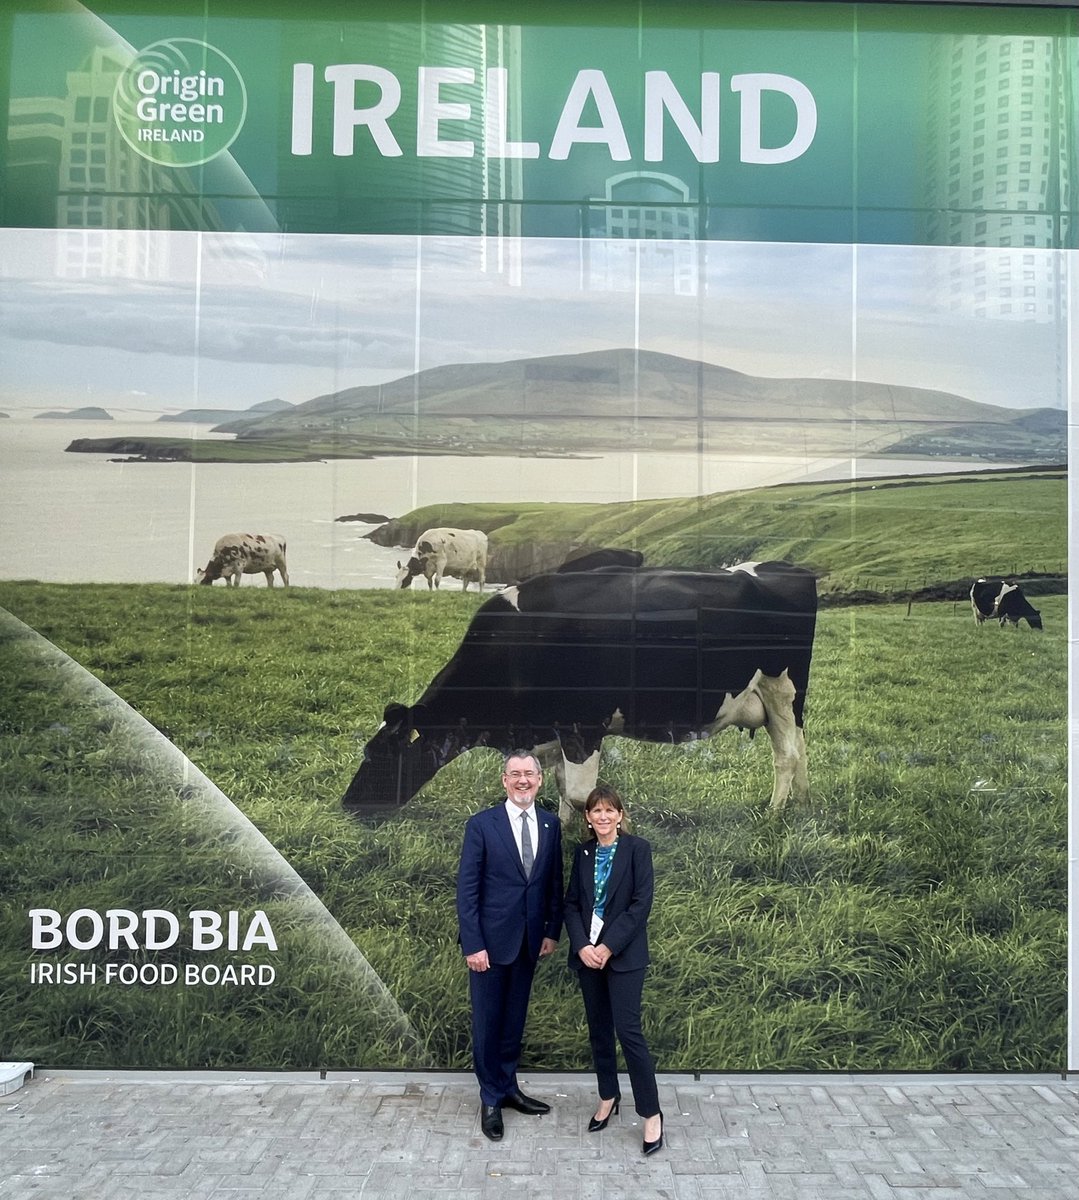 Delighted to be here at @Gulfood today with @Bordbia. As I was queueing to get into the venue earlier, I was v proud to see Ireland’s presence so visible right at the entrance. Great to meet new Bord Bia CEO, Jim O’Toole. Jim, your MENA team does great work 👏 👏 👏 #OriginGreen